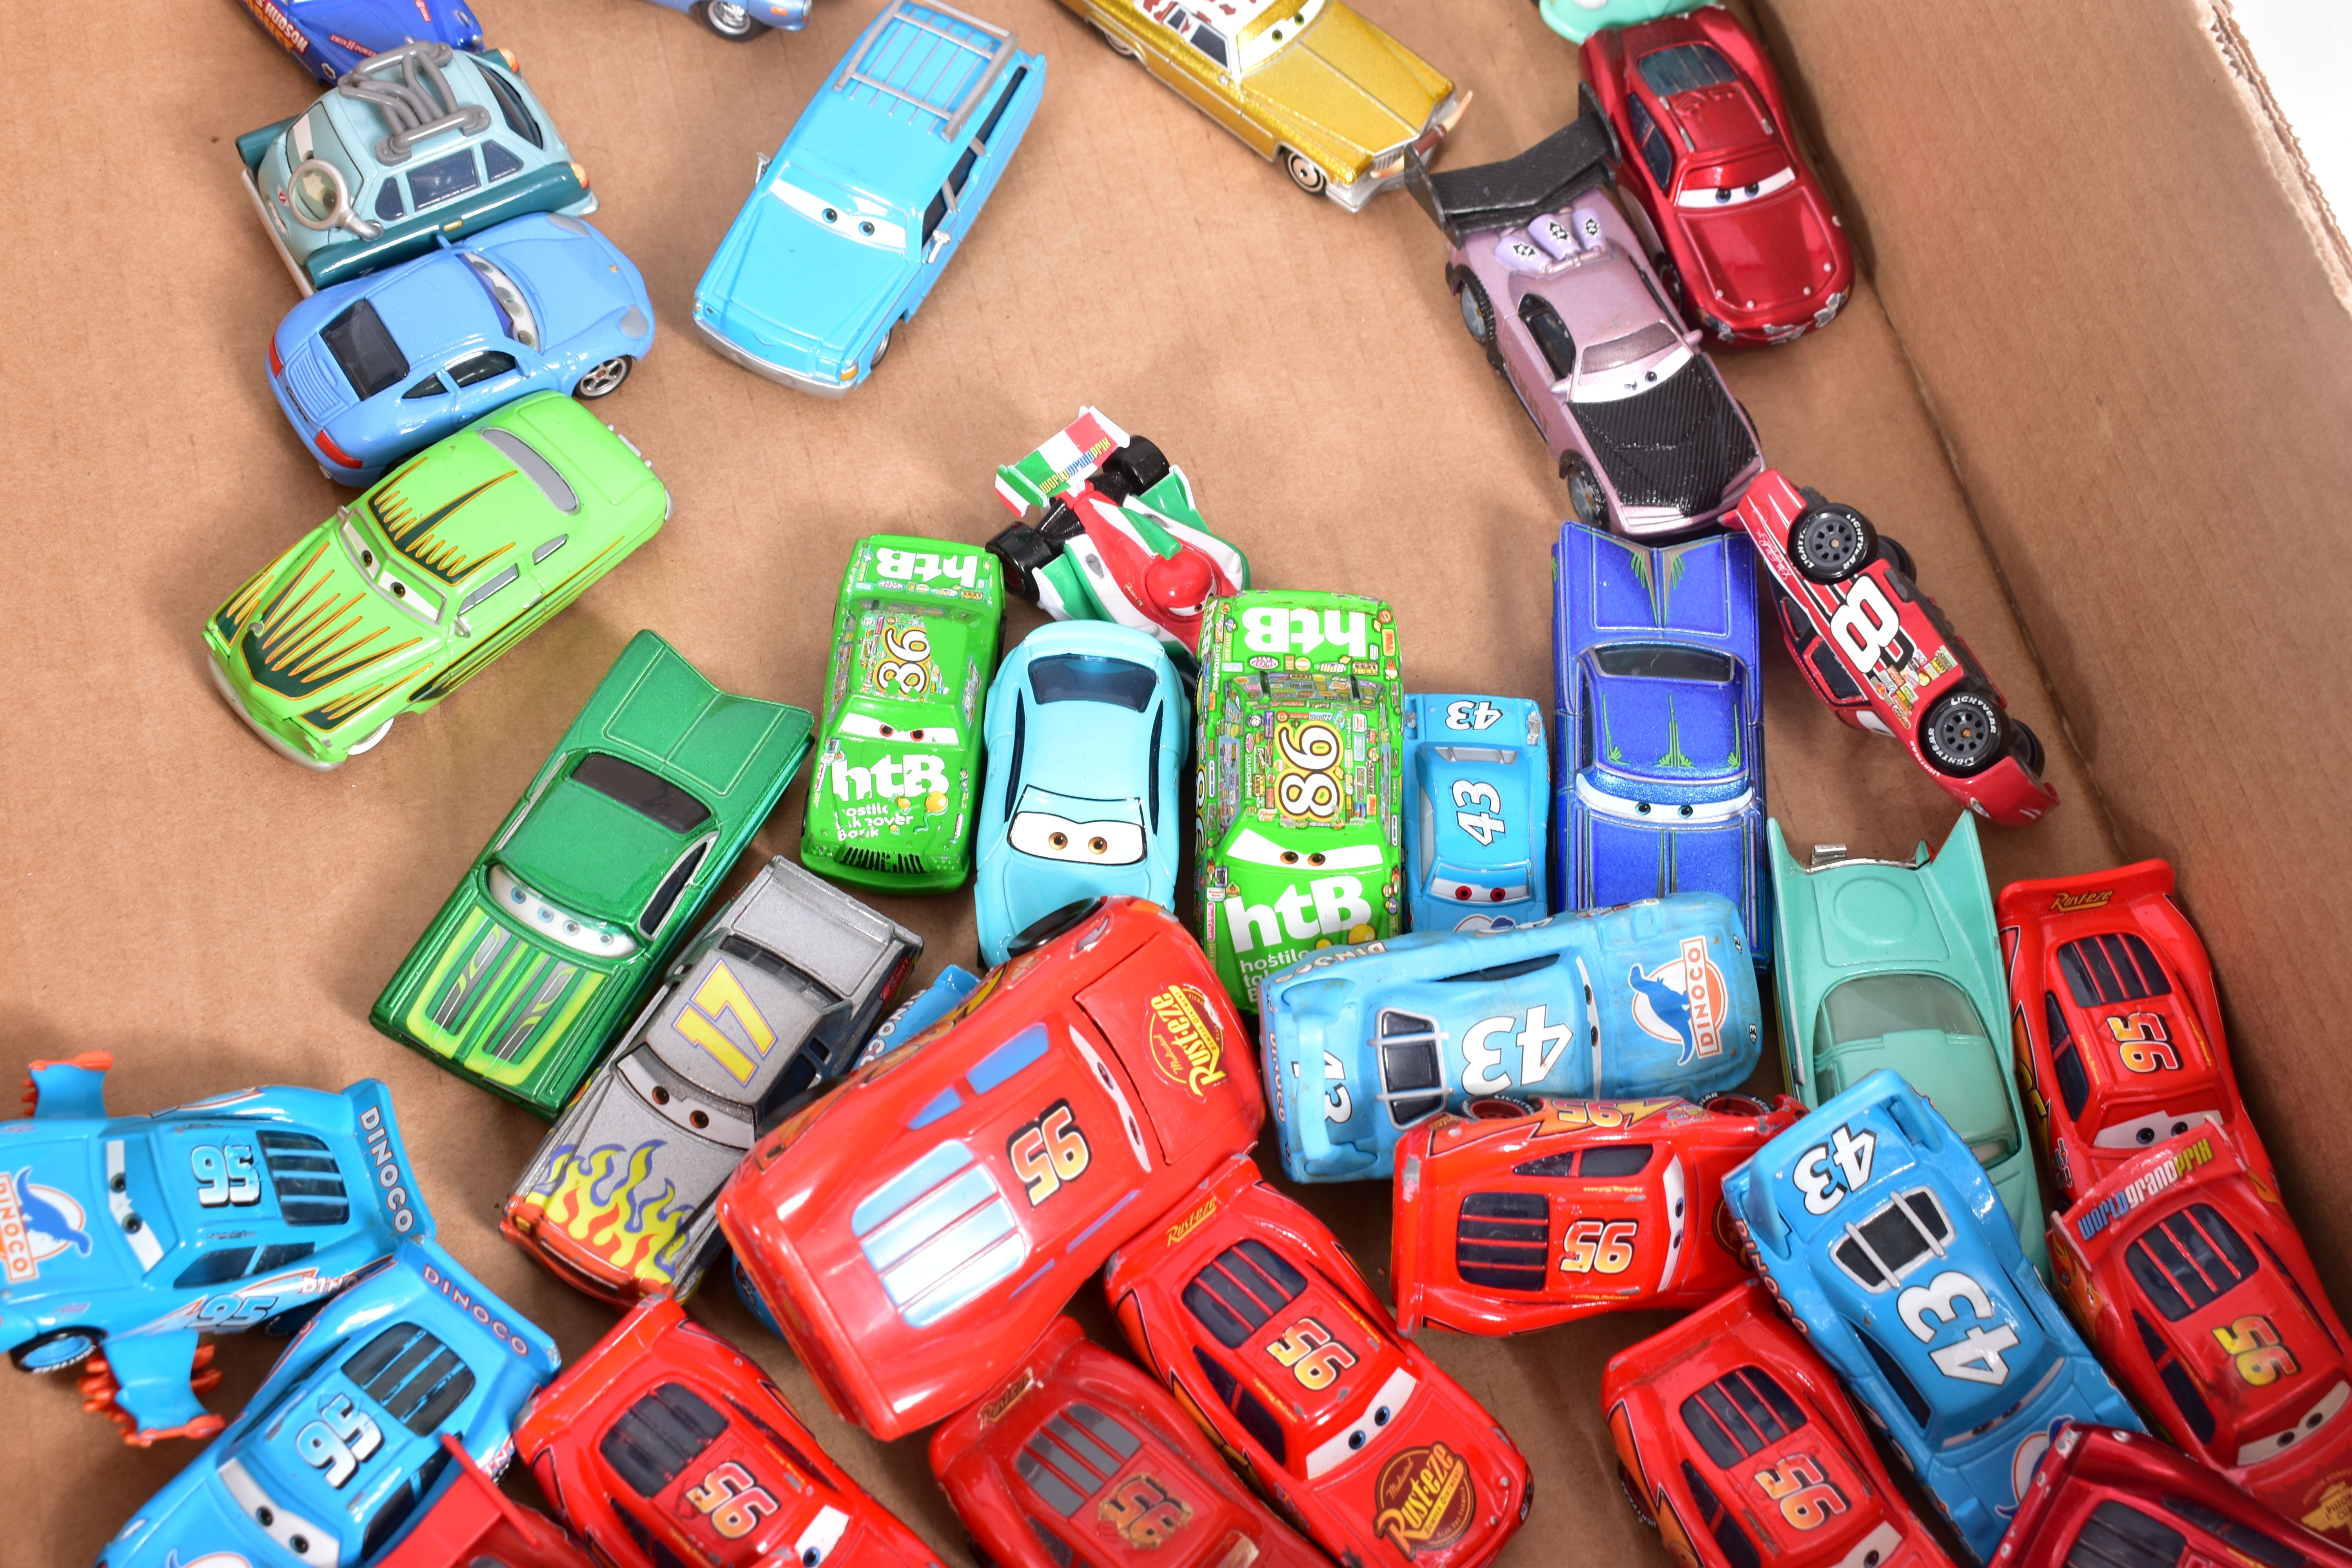 A COLLECTION OF PLASTIC MODELS FROM THE DISNEY PIXAR FILM CARS, assorted models, scales and - Image 6 of 7